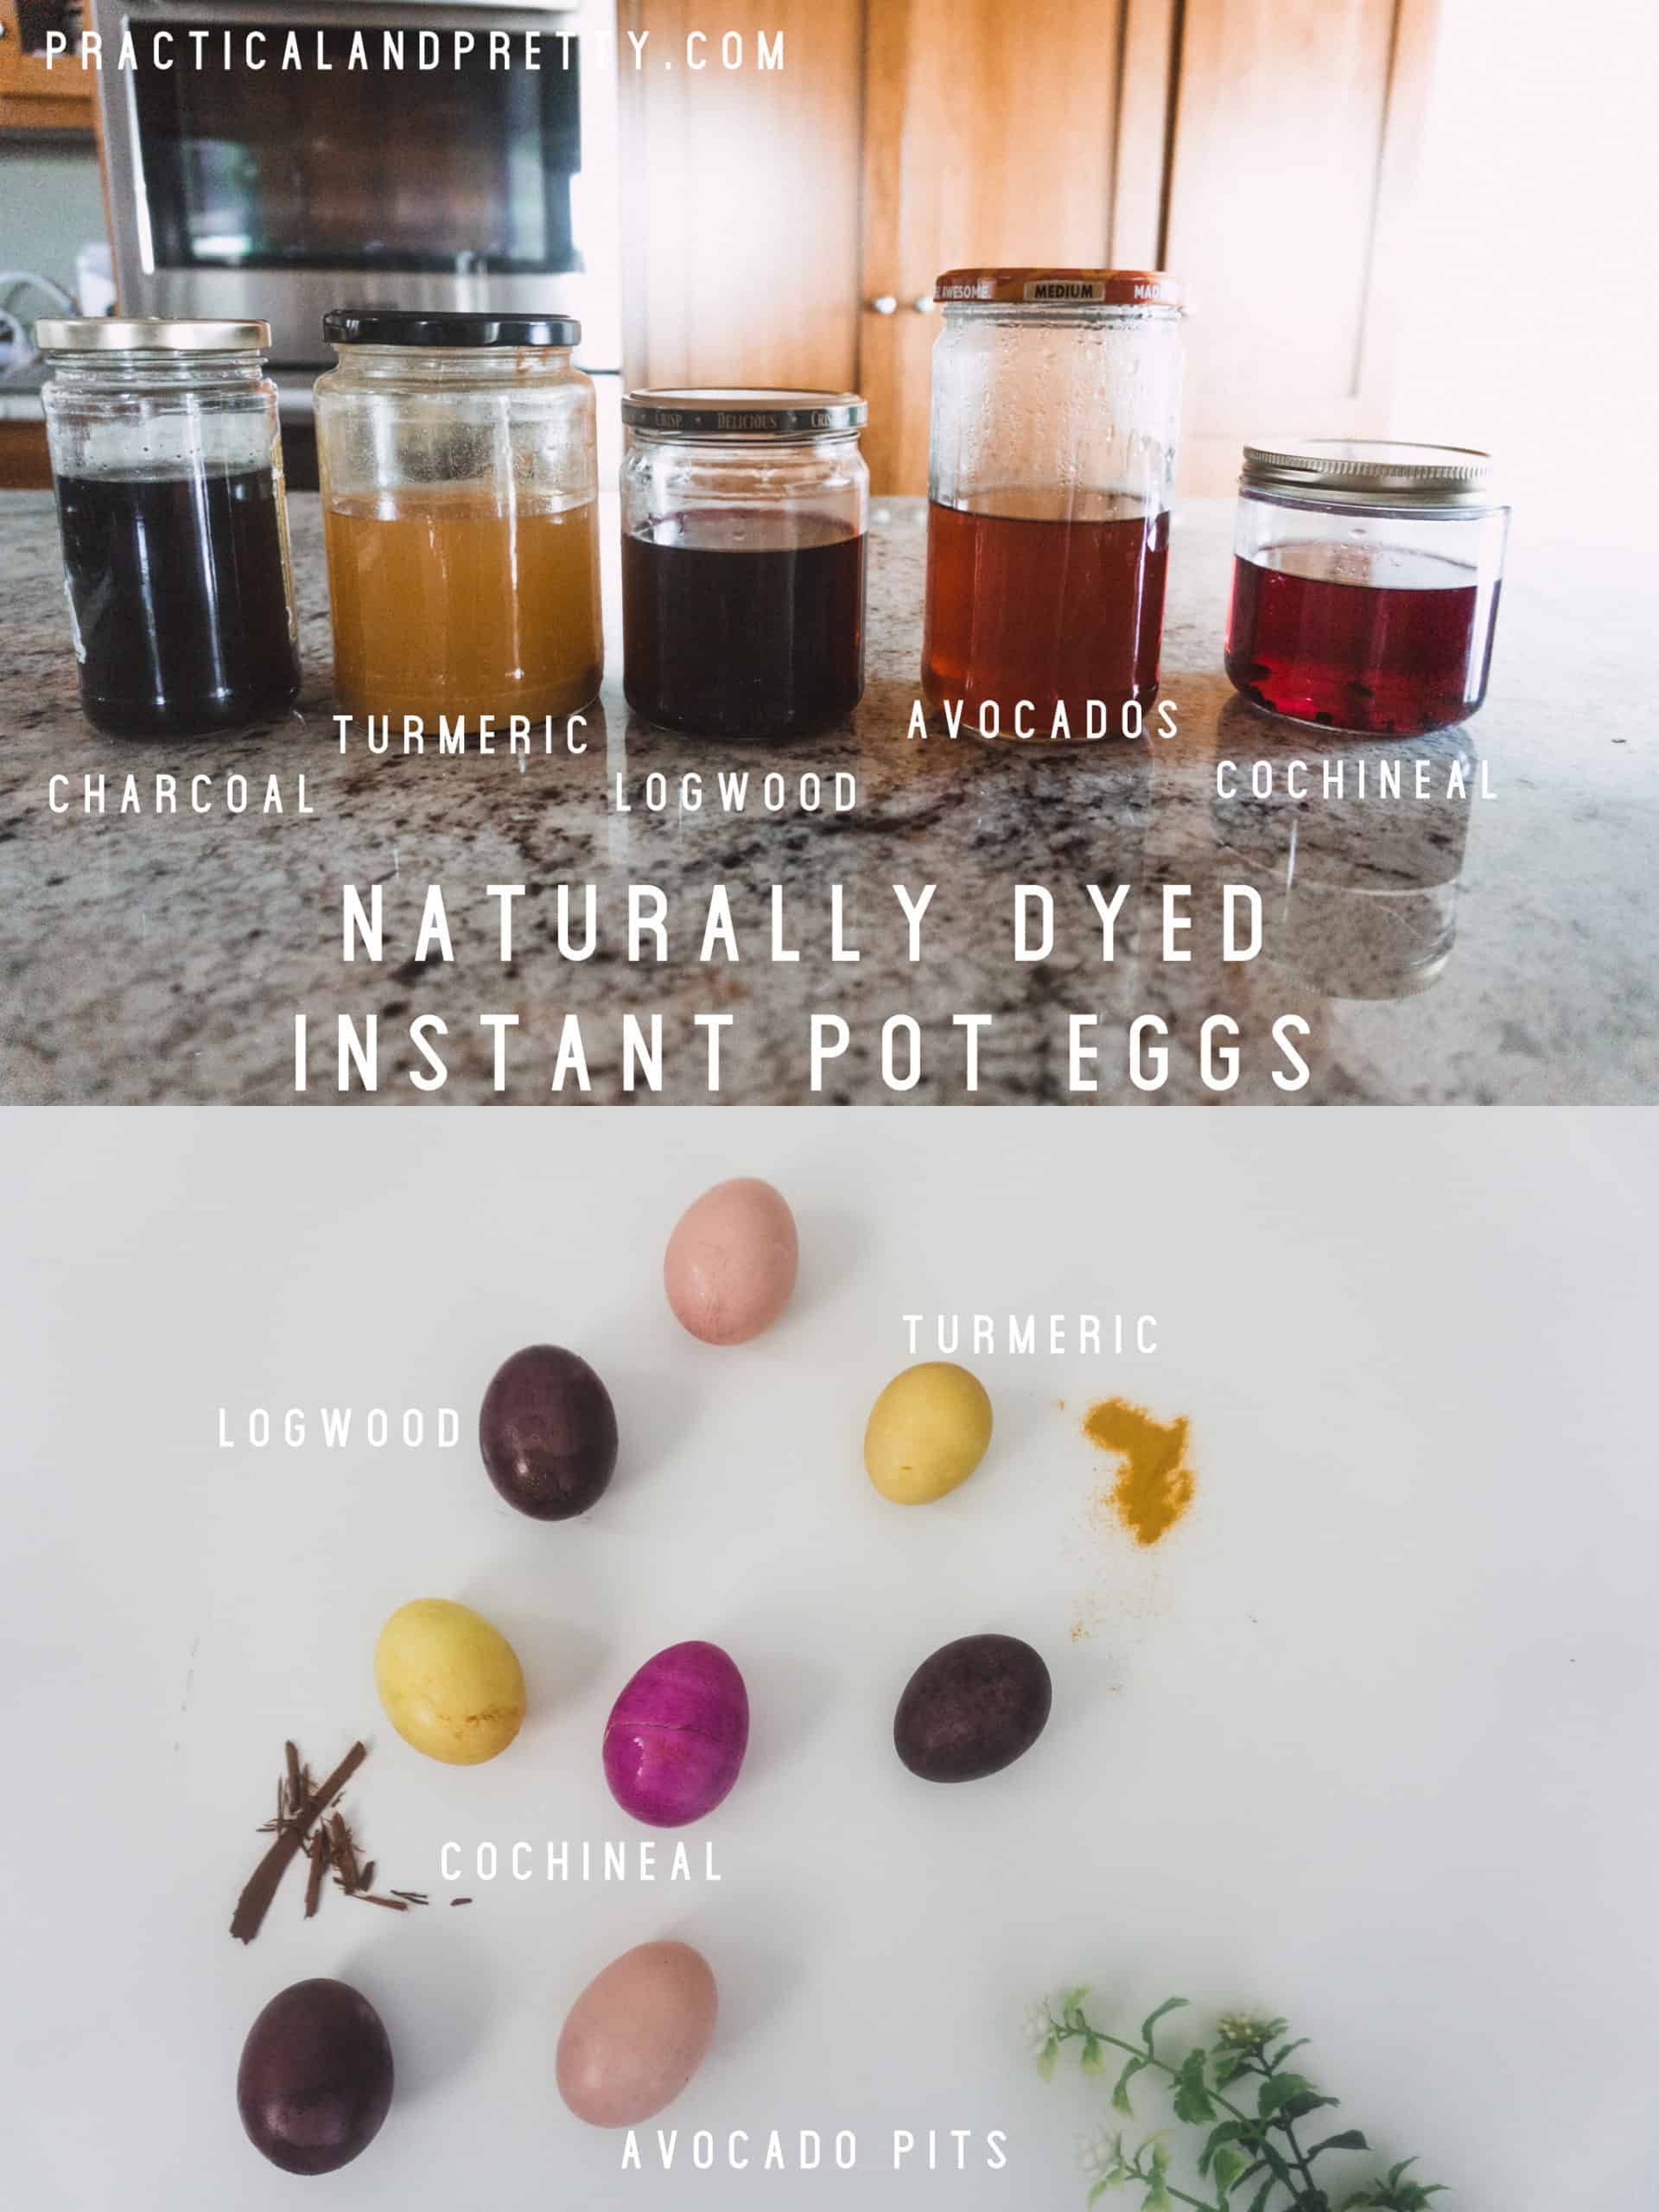 Dye your eggs using natural dyes and hard boil them at the same time with this instant pot eggs tutorial. There are so many different color options!